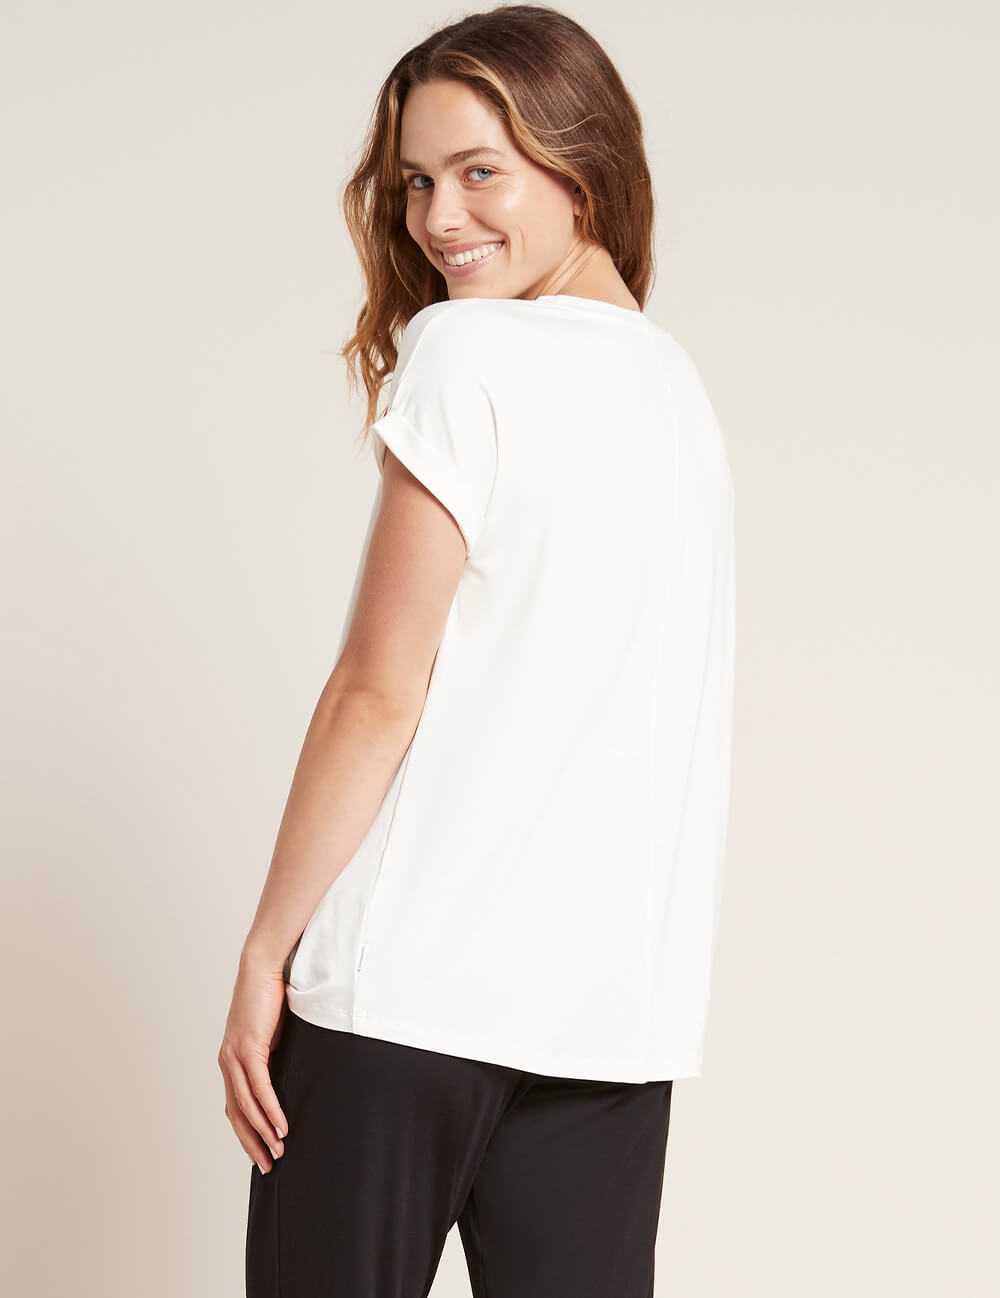 Downtime-Lounge-Top-white-back.jpg